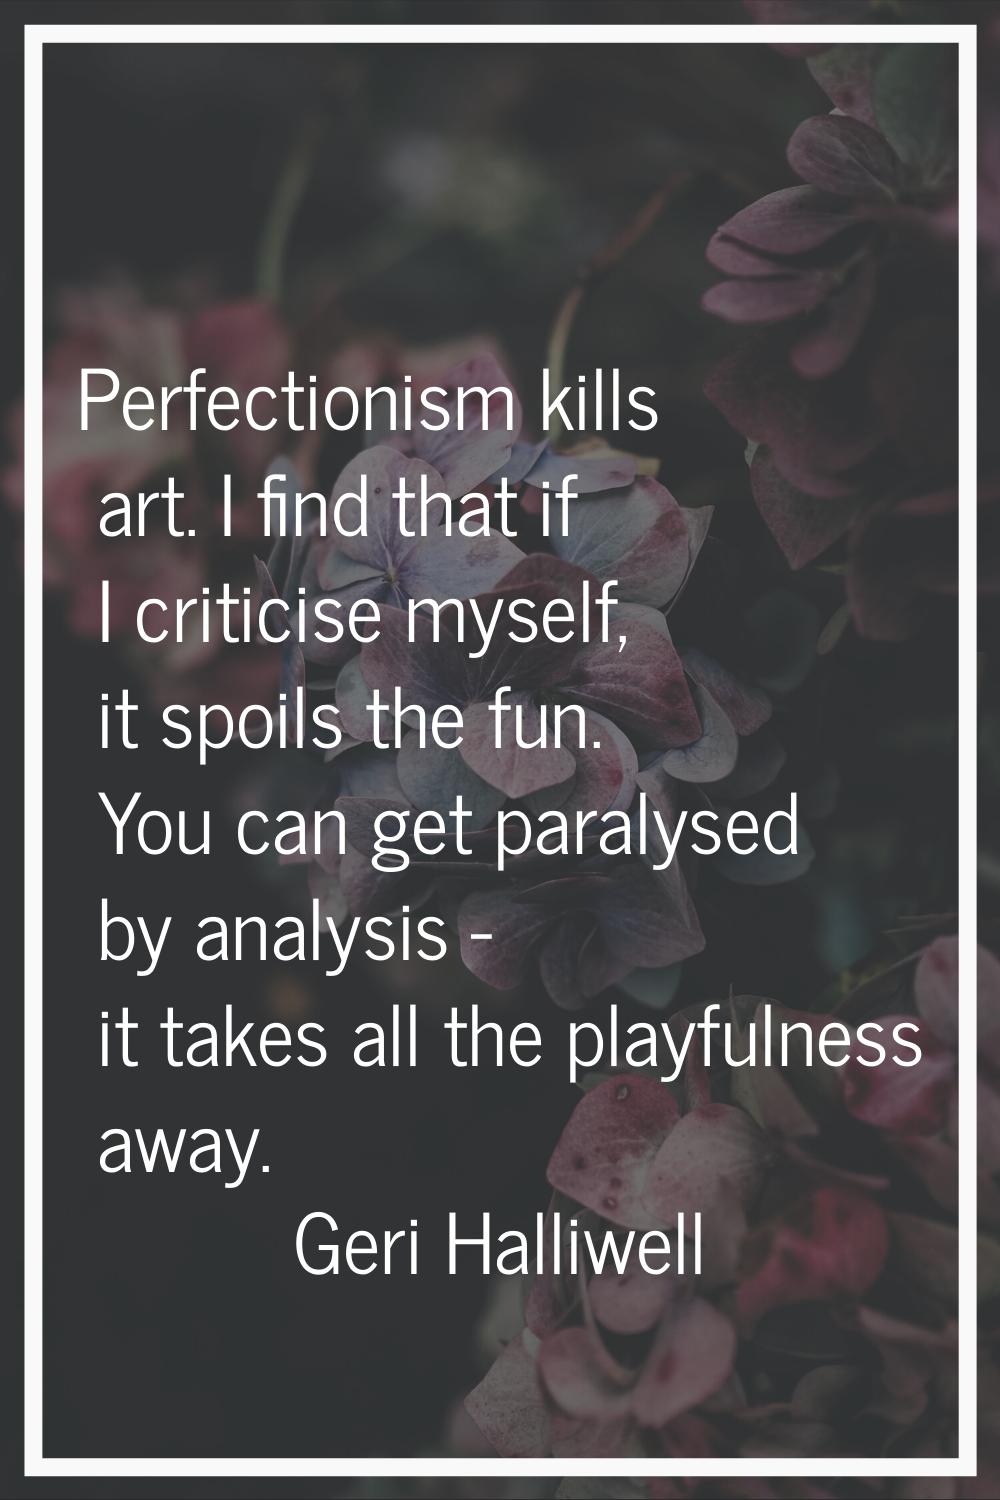 Perfectionism kills art. I find that if I criticise myself, it spoils the fun. You can get paralyse